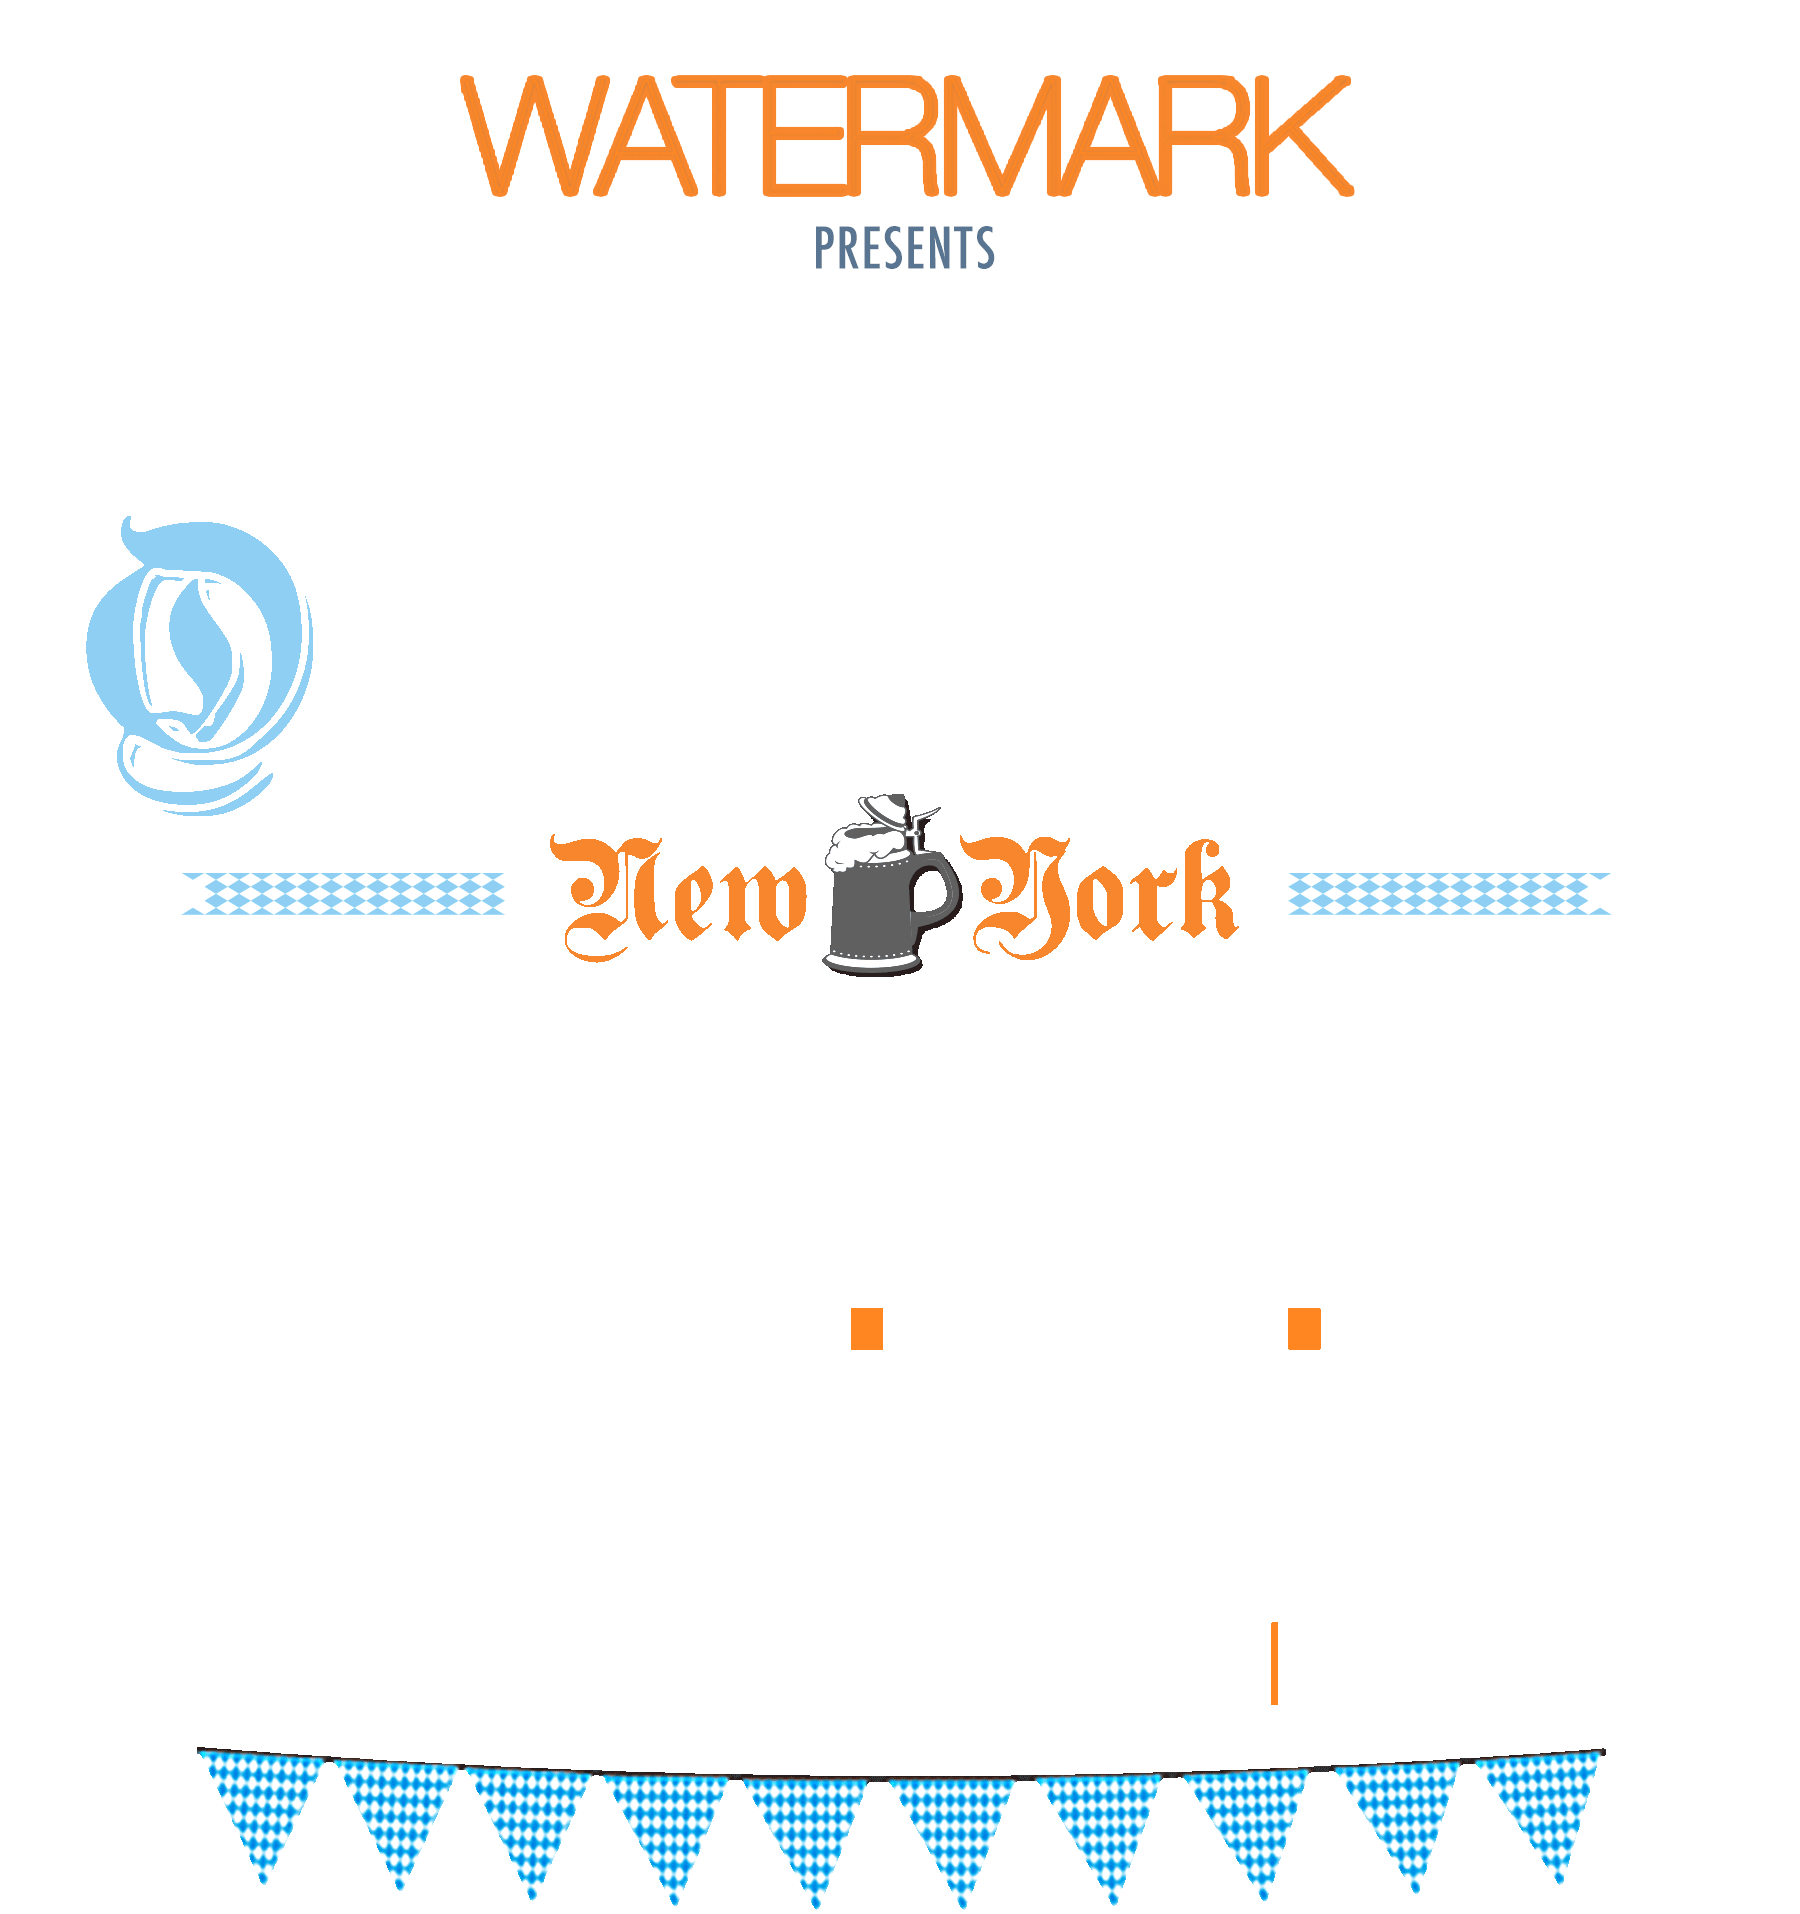 OktoberFest NYC 2023 from September 8th to October 29th